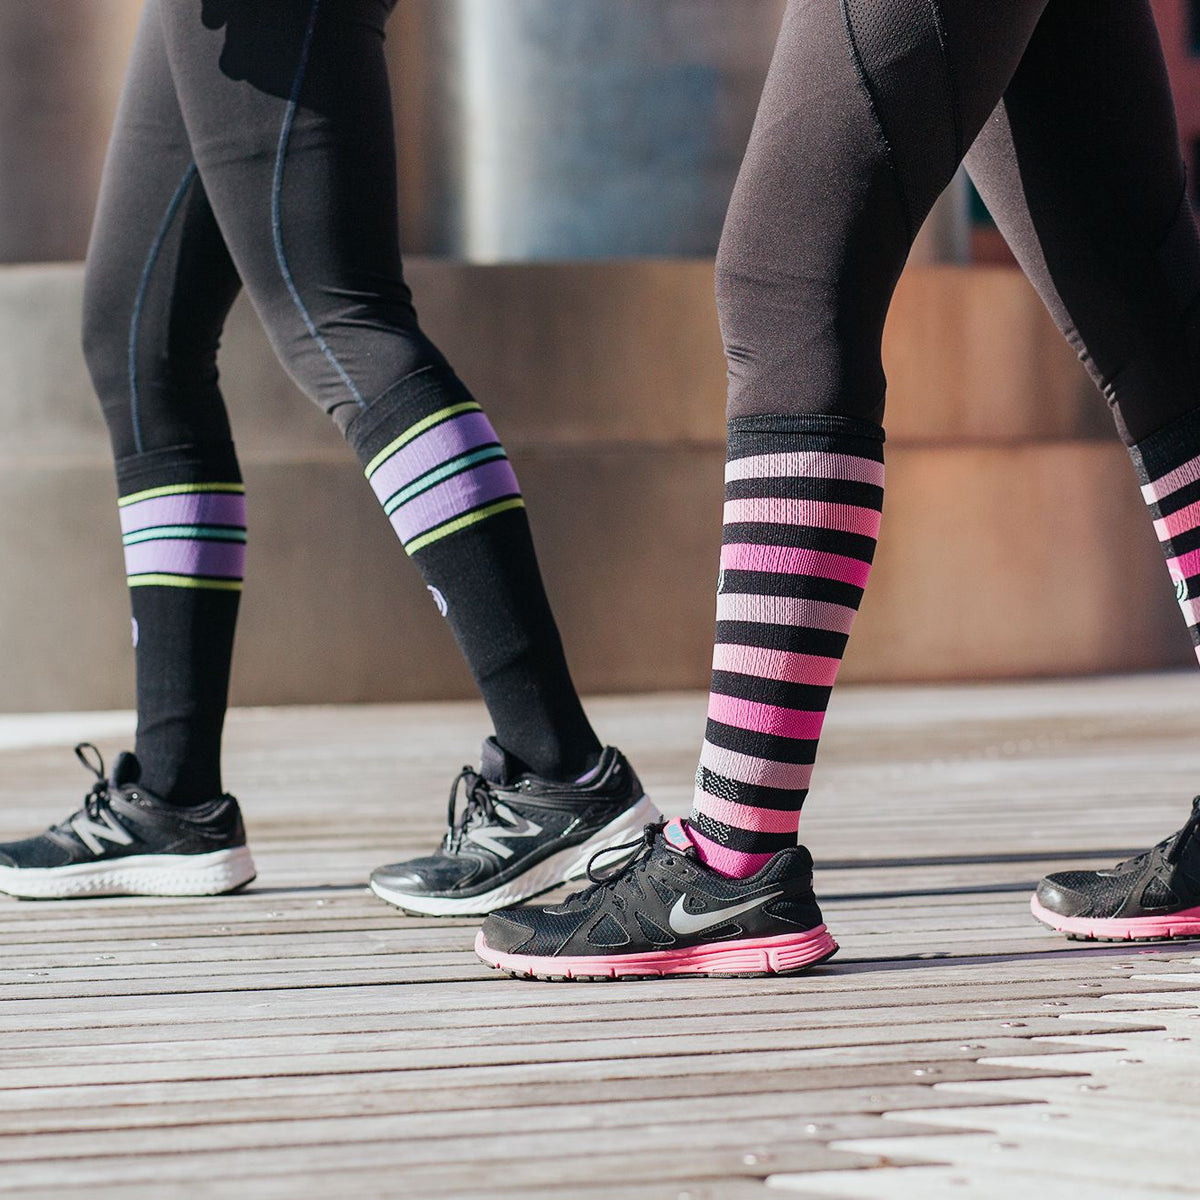 Which Level of Compression Socks Do I Need?